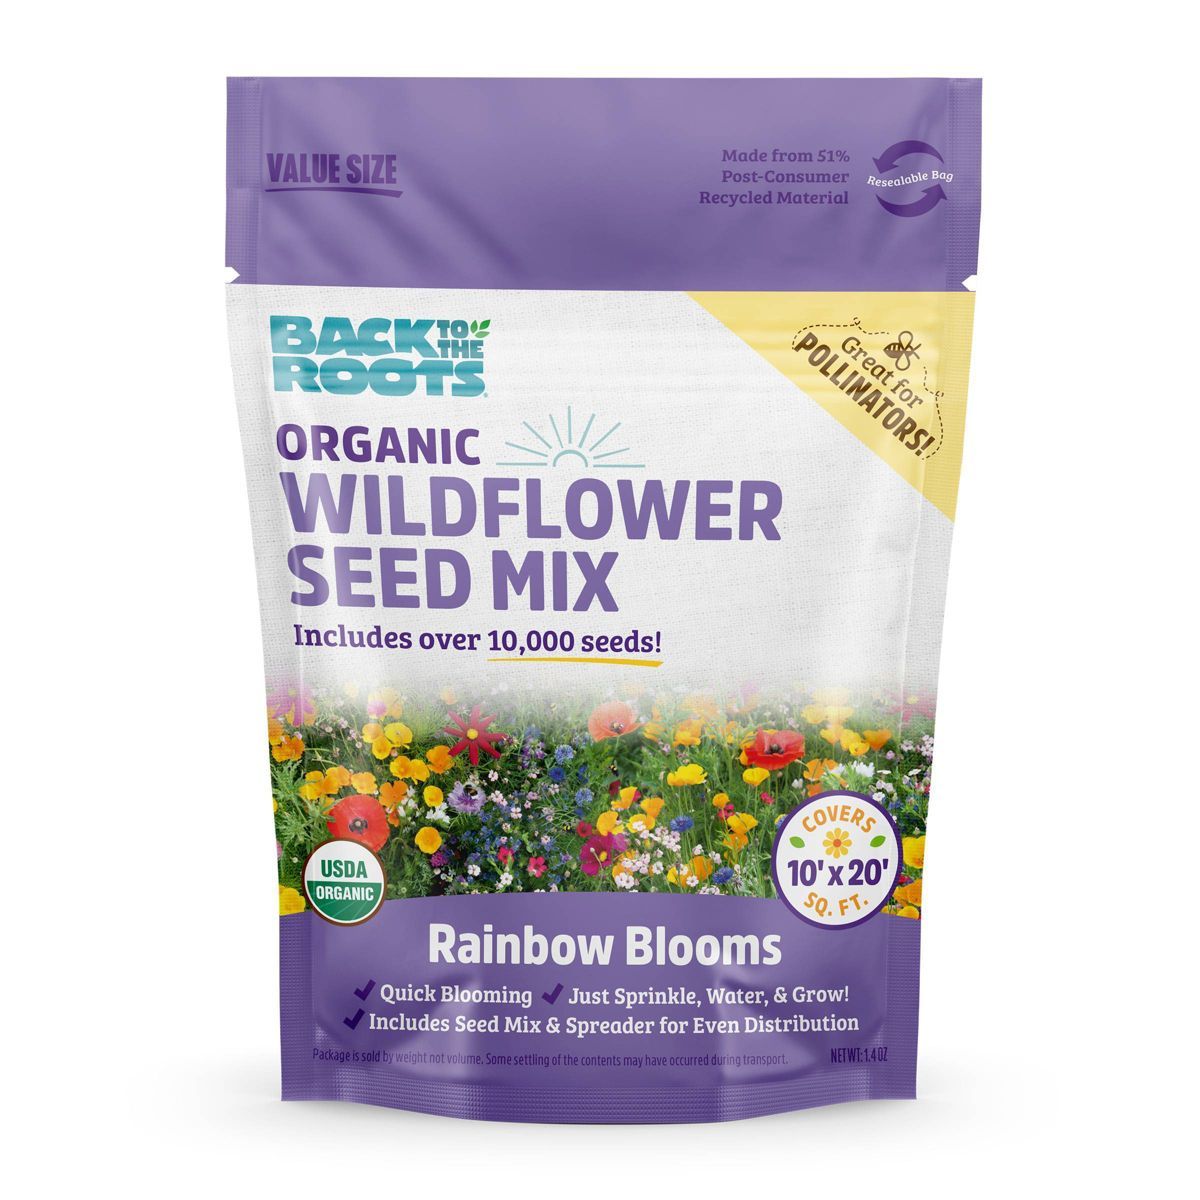 Back to the Roots Organic Rainbow Blooms Wildflower Seed Mix | Target